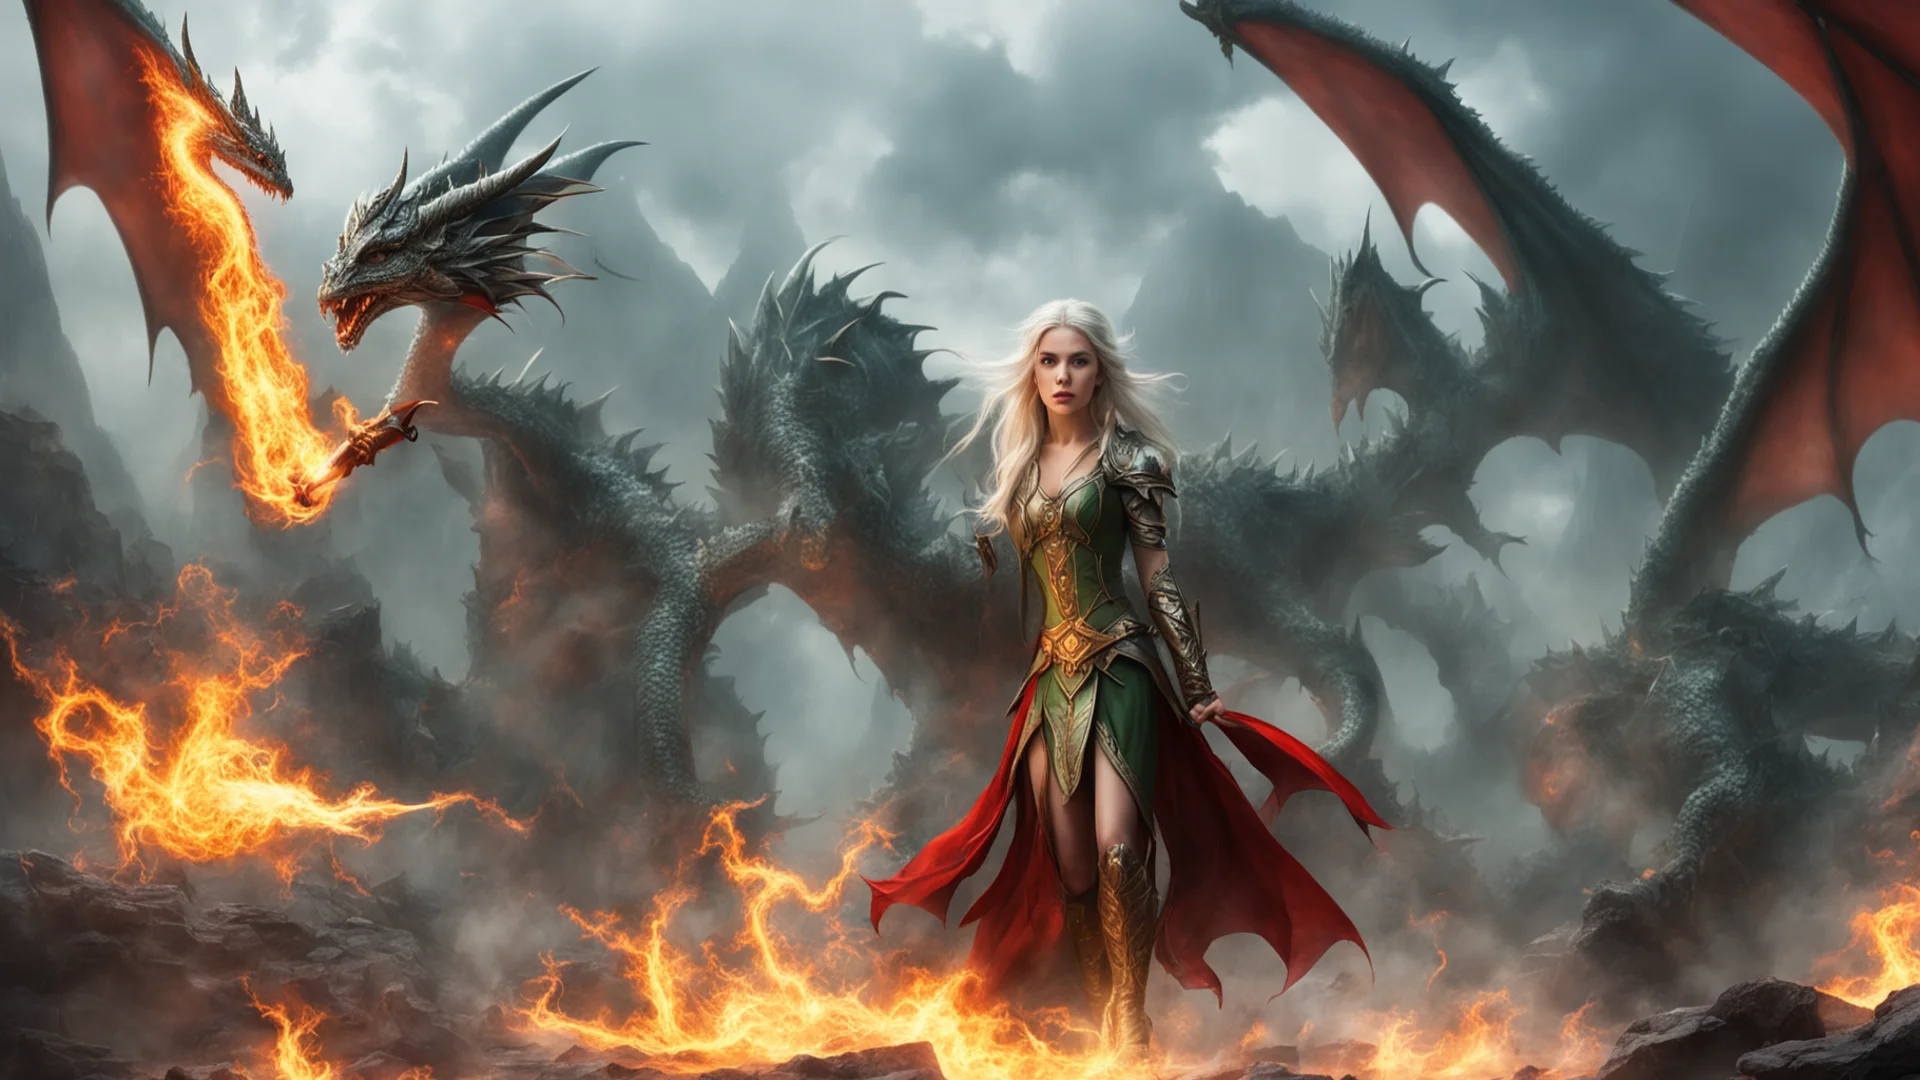 aielven princess casts a spell in front of attacking dragon wide